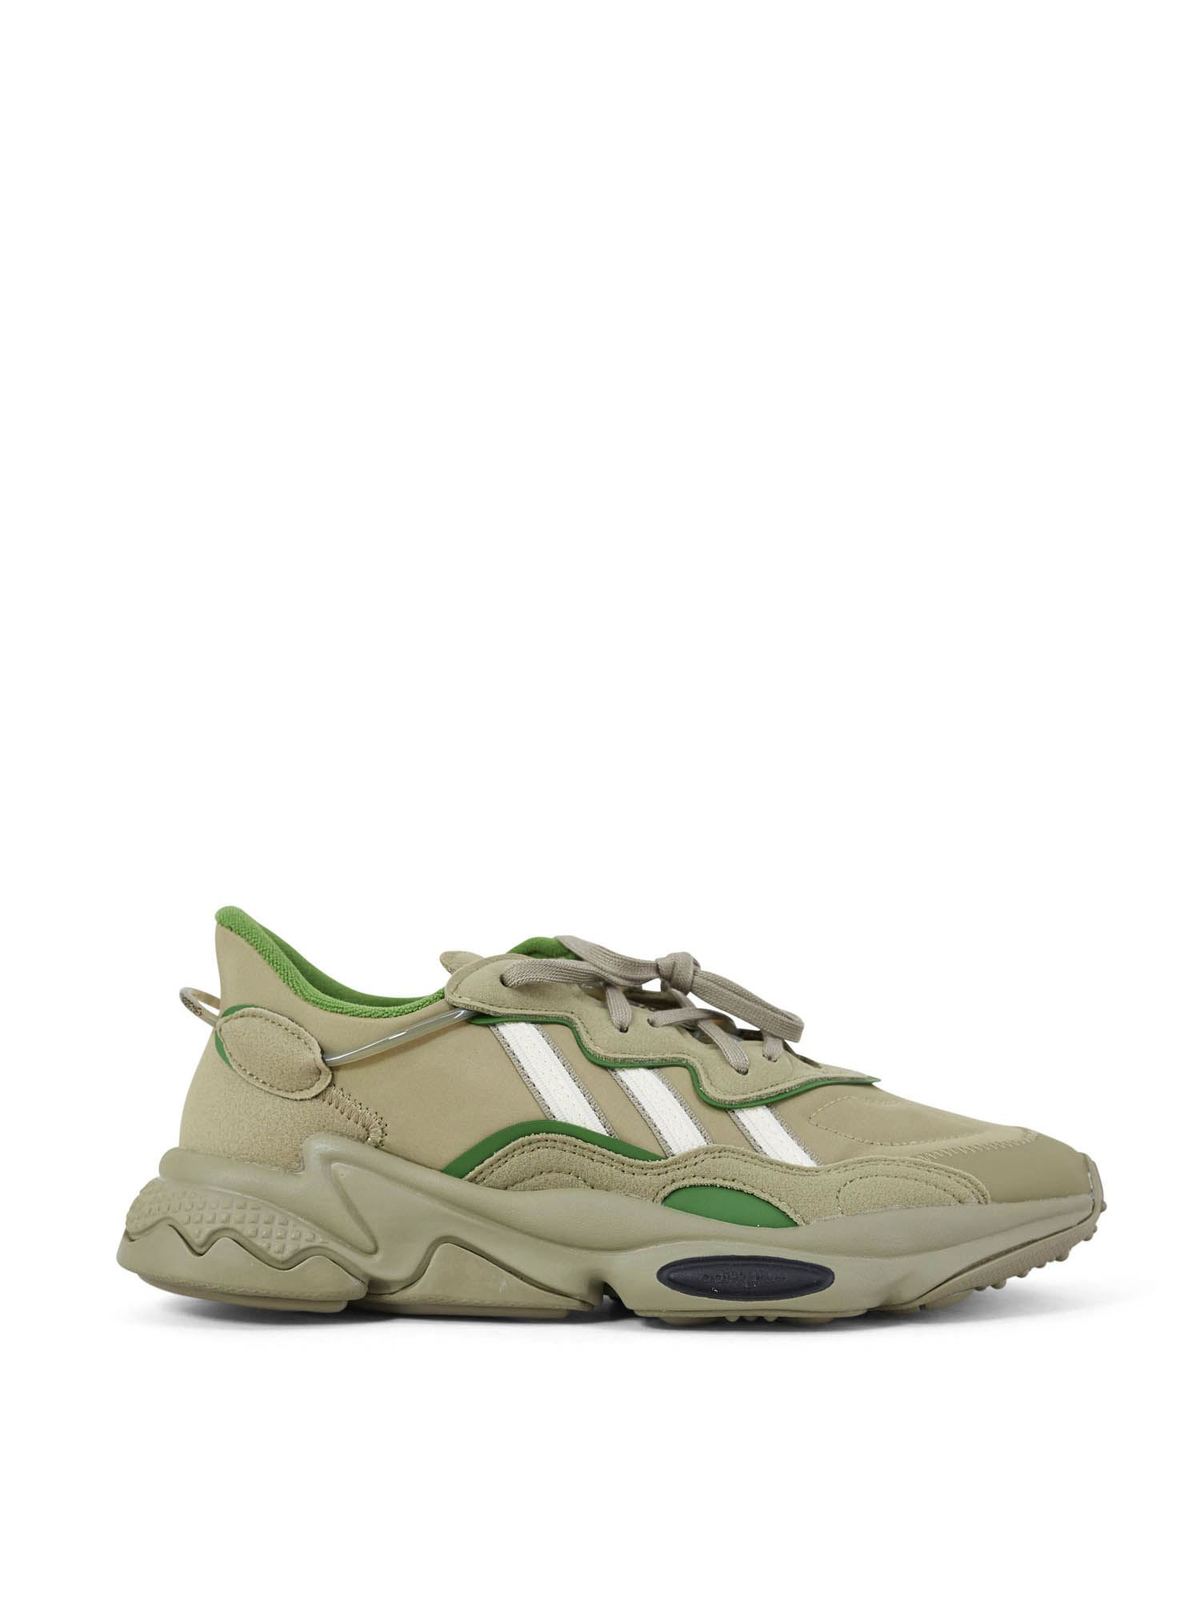 Trainers Adidas Originals - Ozweego sneakers in Orbit Green color - H04241